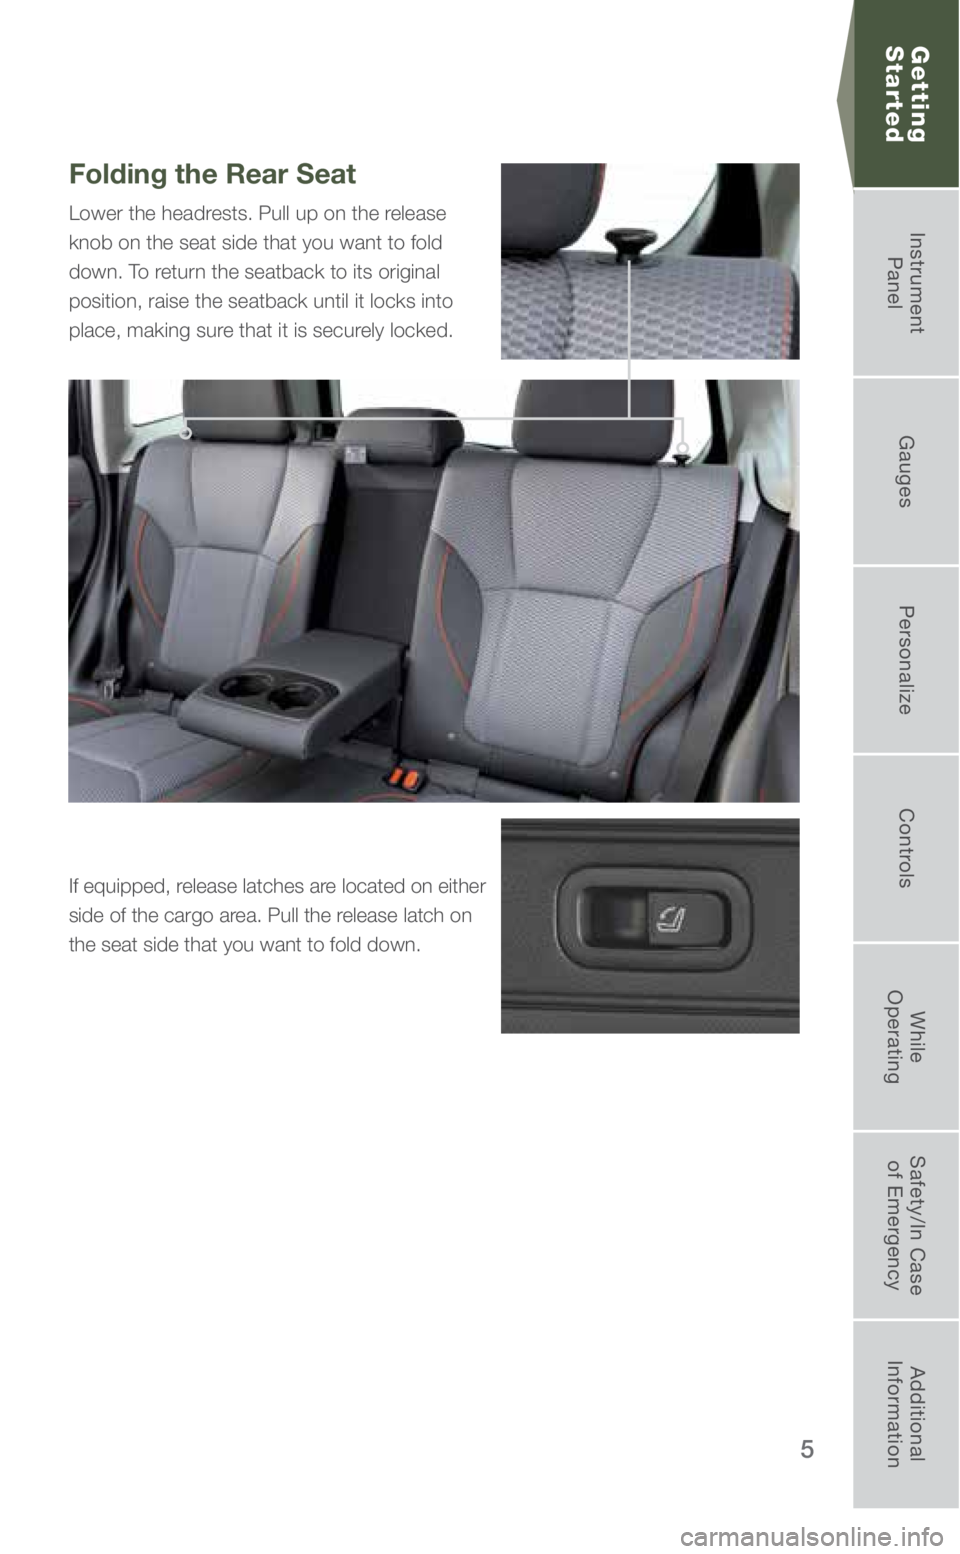 SUBARU FORESTER 2019  Quick Guide 5
Folding the Rear Seat 
Lower the headrests. Pull up on the release 
knob on the seat side that you want to fold 
down. To return the seatback to its original 
position, raise the seatback until it l